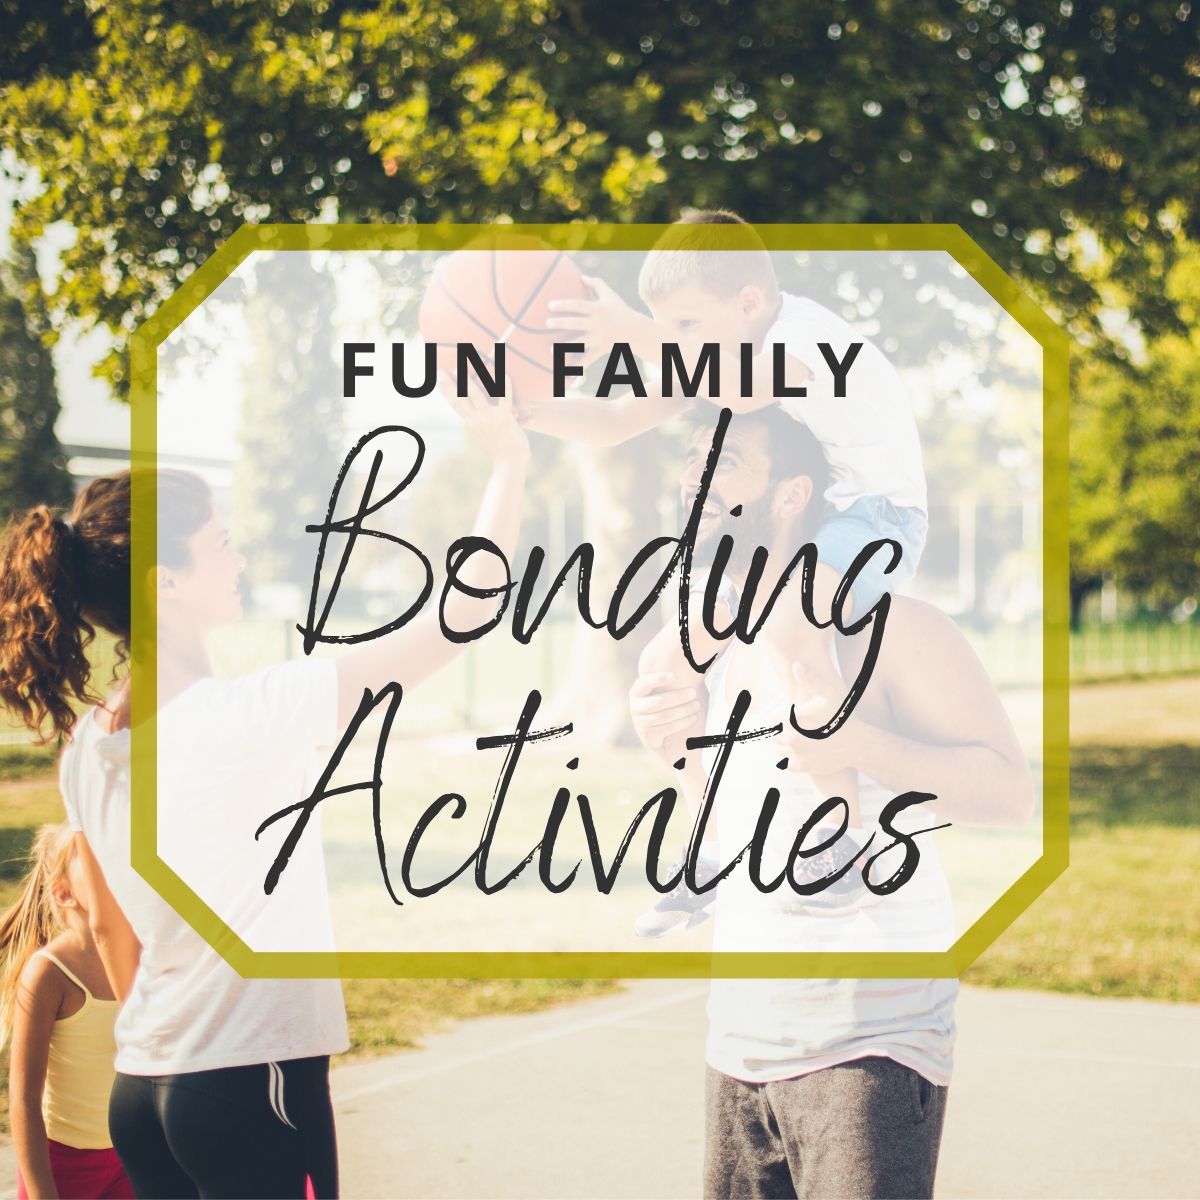 28 Fun Family Bonding Activities - Why is it Important?